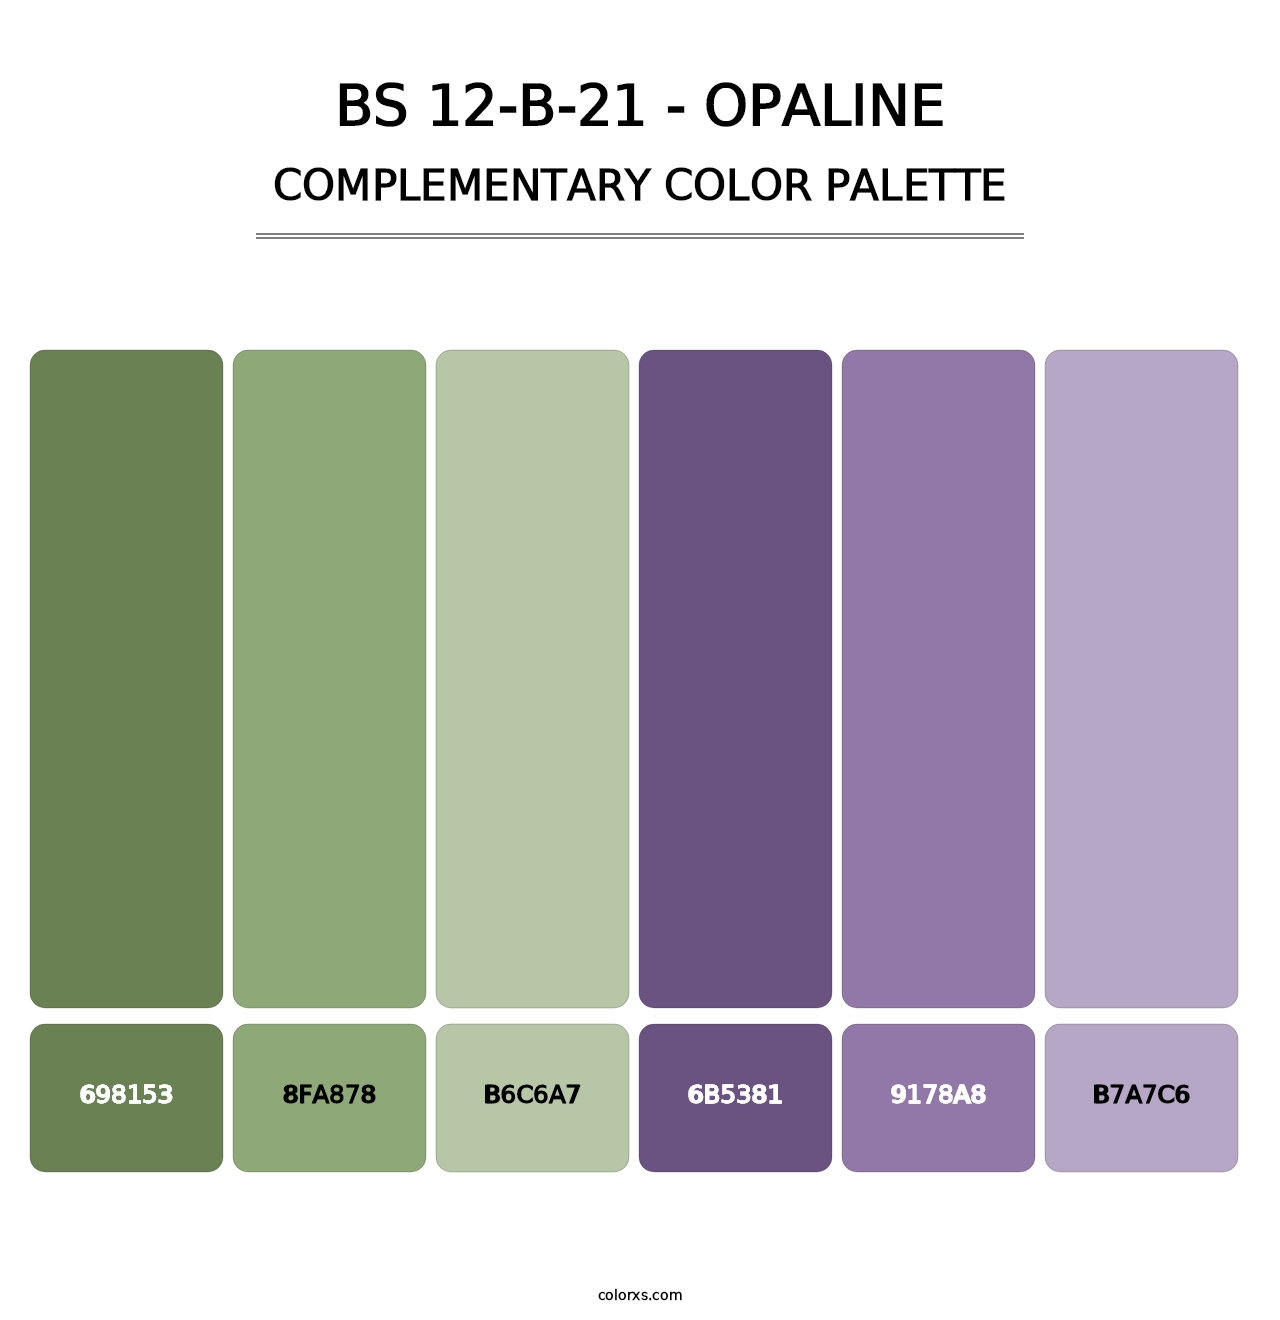 BS 12-B-21 - Opaline - Complementary Color Palette